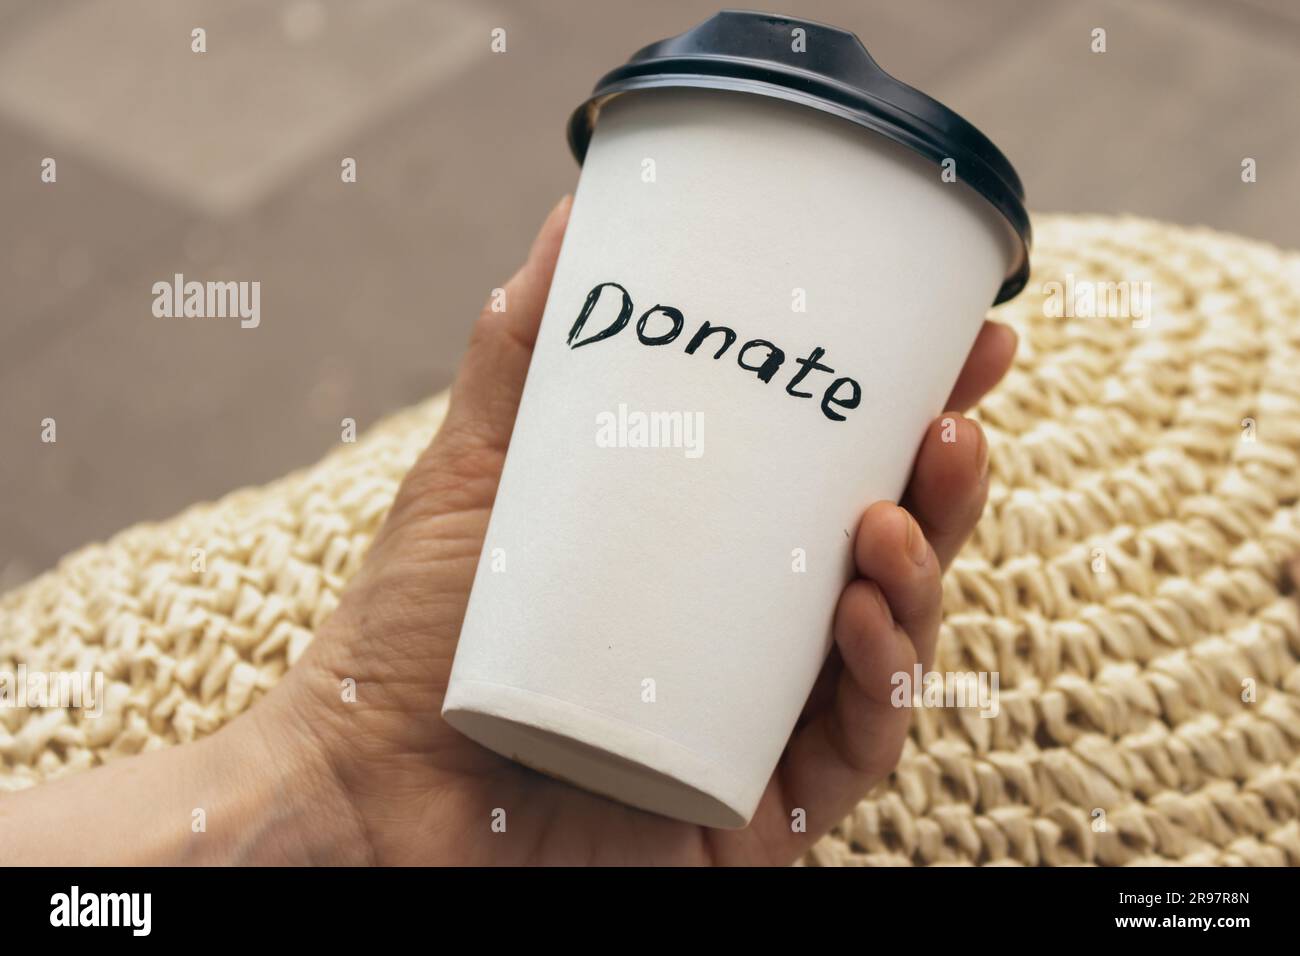 White cup with text Donate in hand. Charity concept. Hand holding cup of coffee take away. Donate logo on paper cup. Donation concept. Social activity Stock Photo